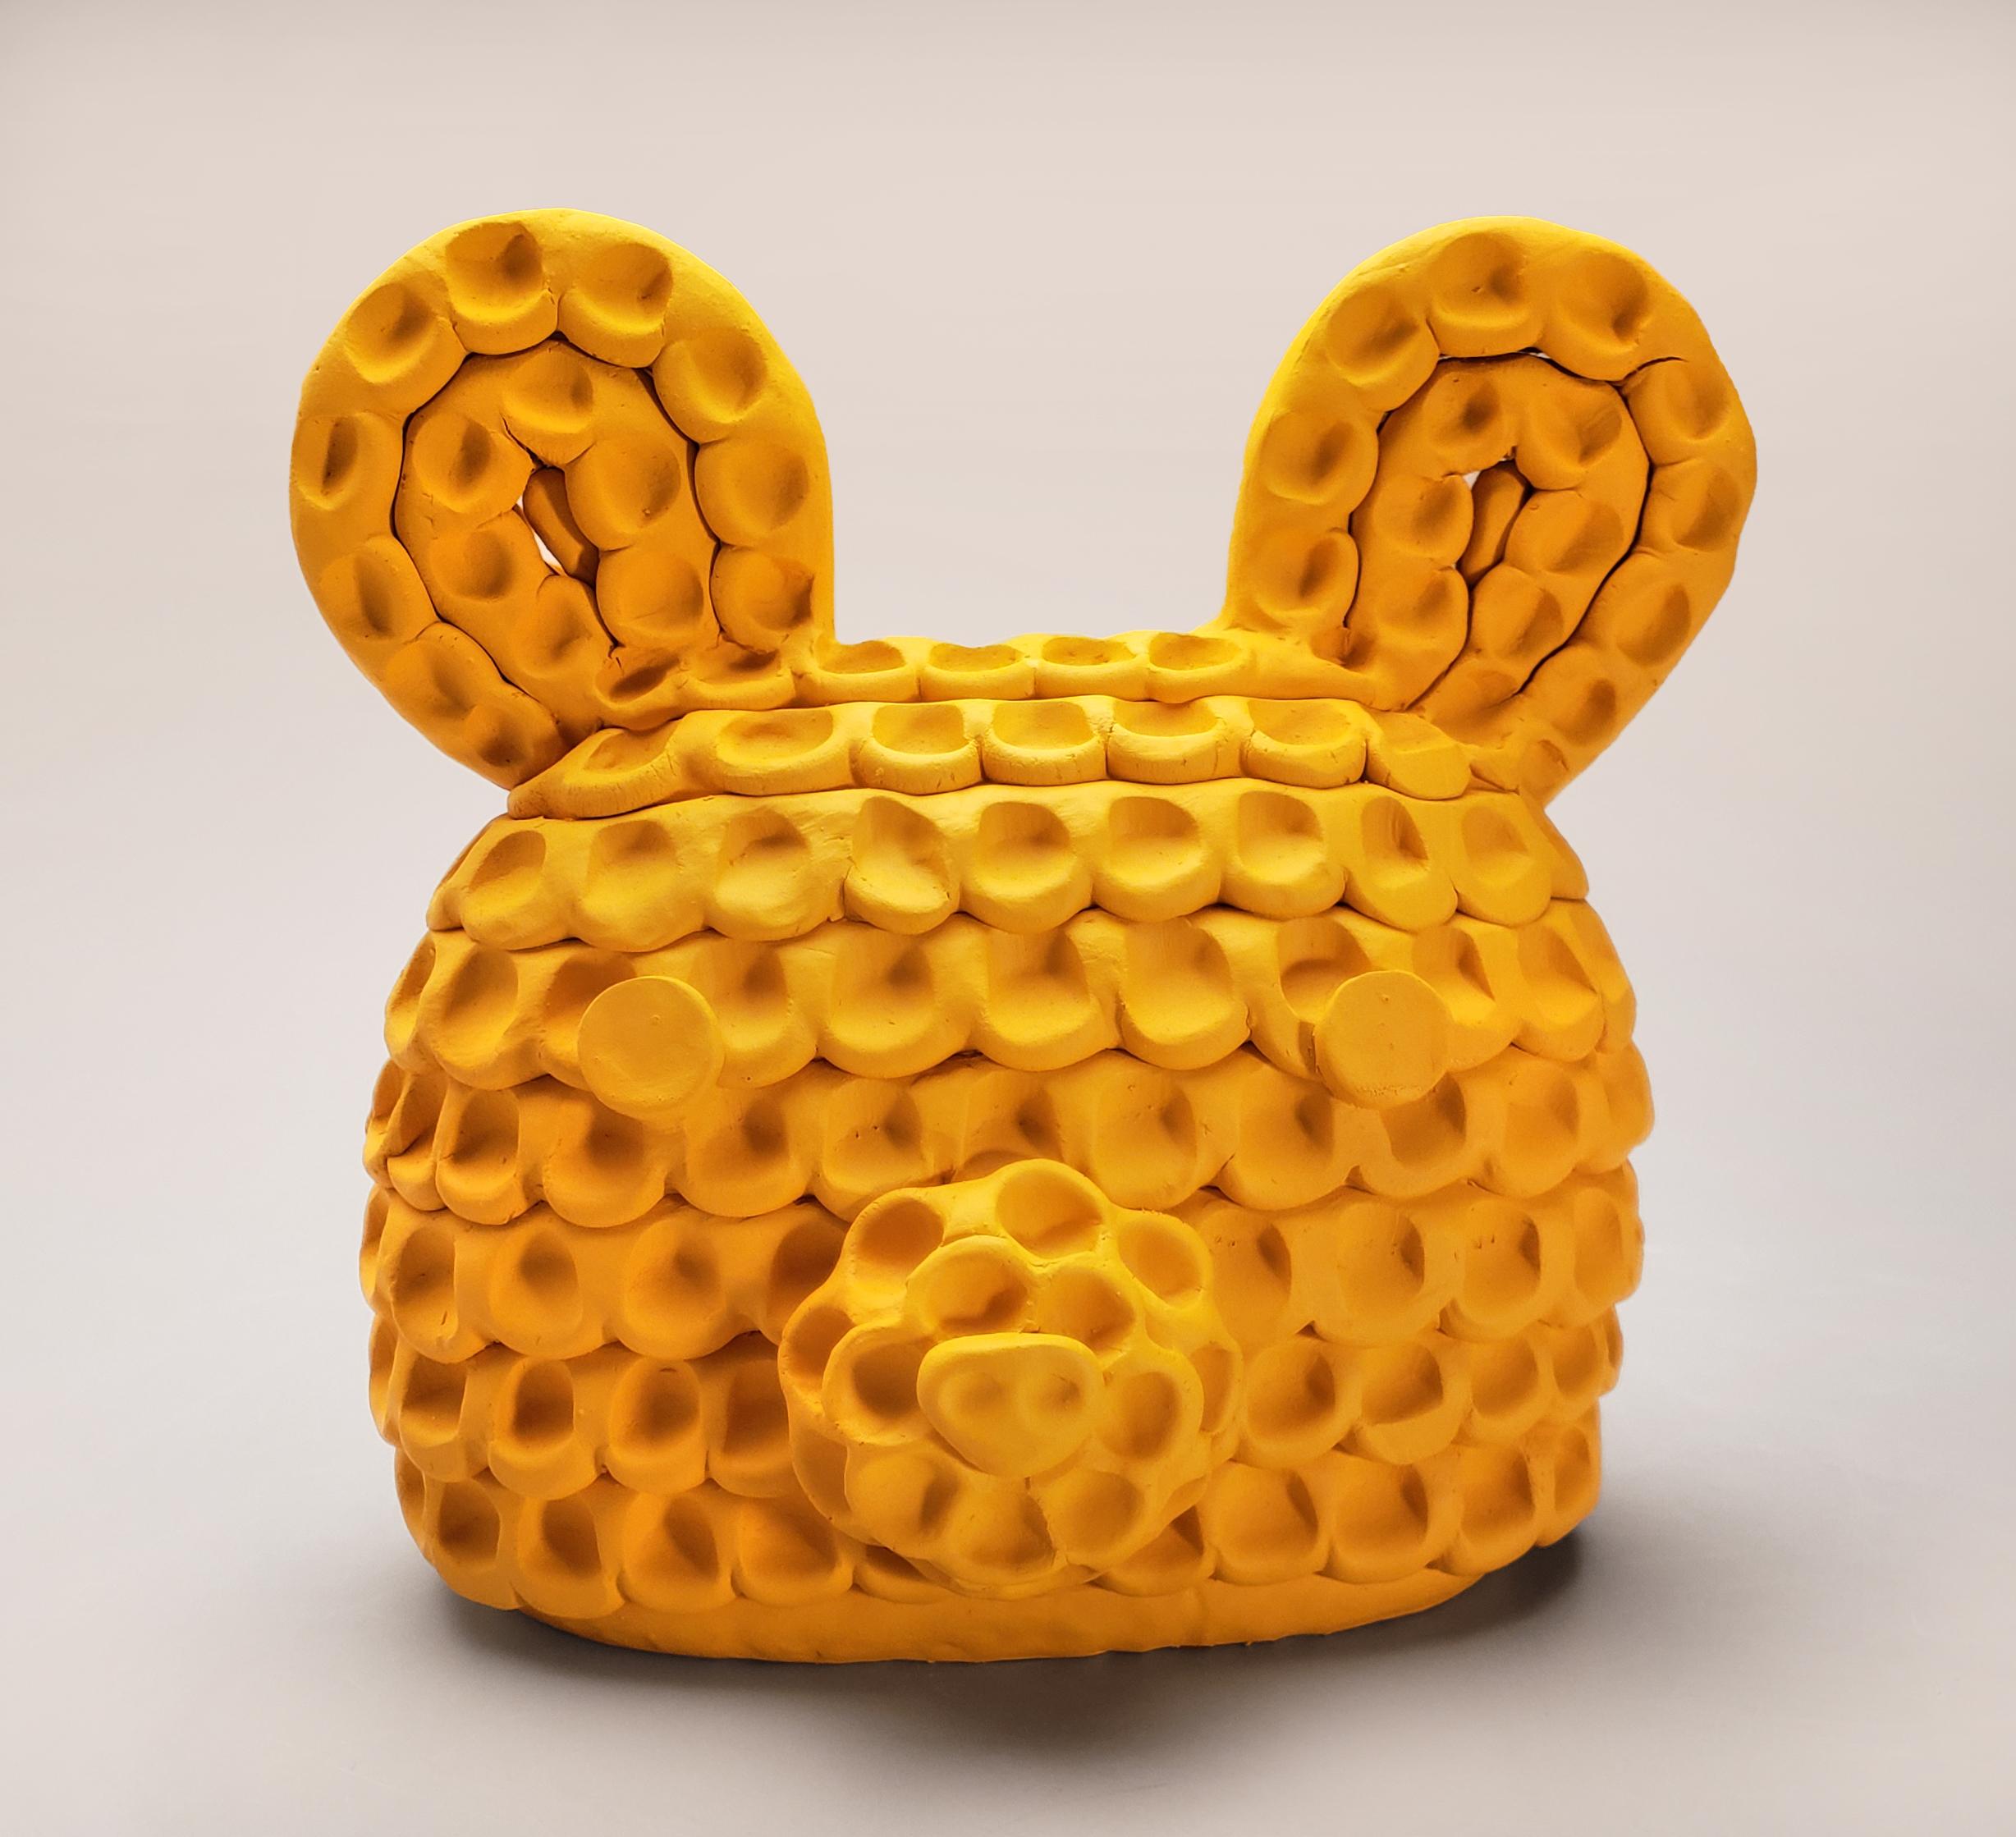 Austyn Taylor Abstract Sculpture - "Honey Bear" Small Yellow Abstract Contemporary Stoneware Sculpture of a Bear